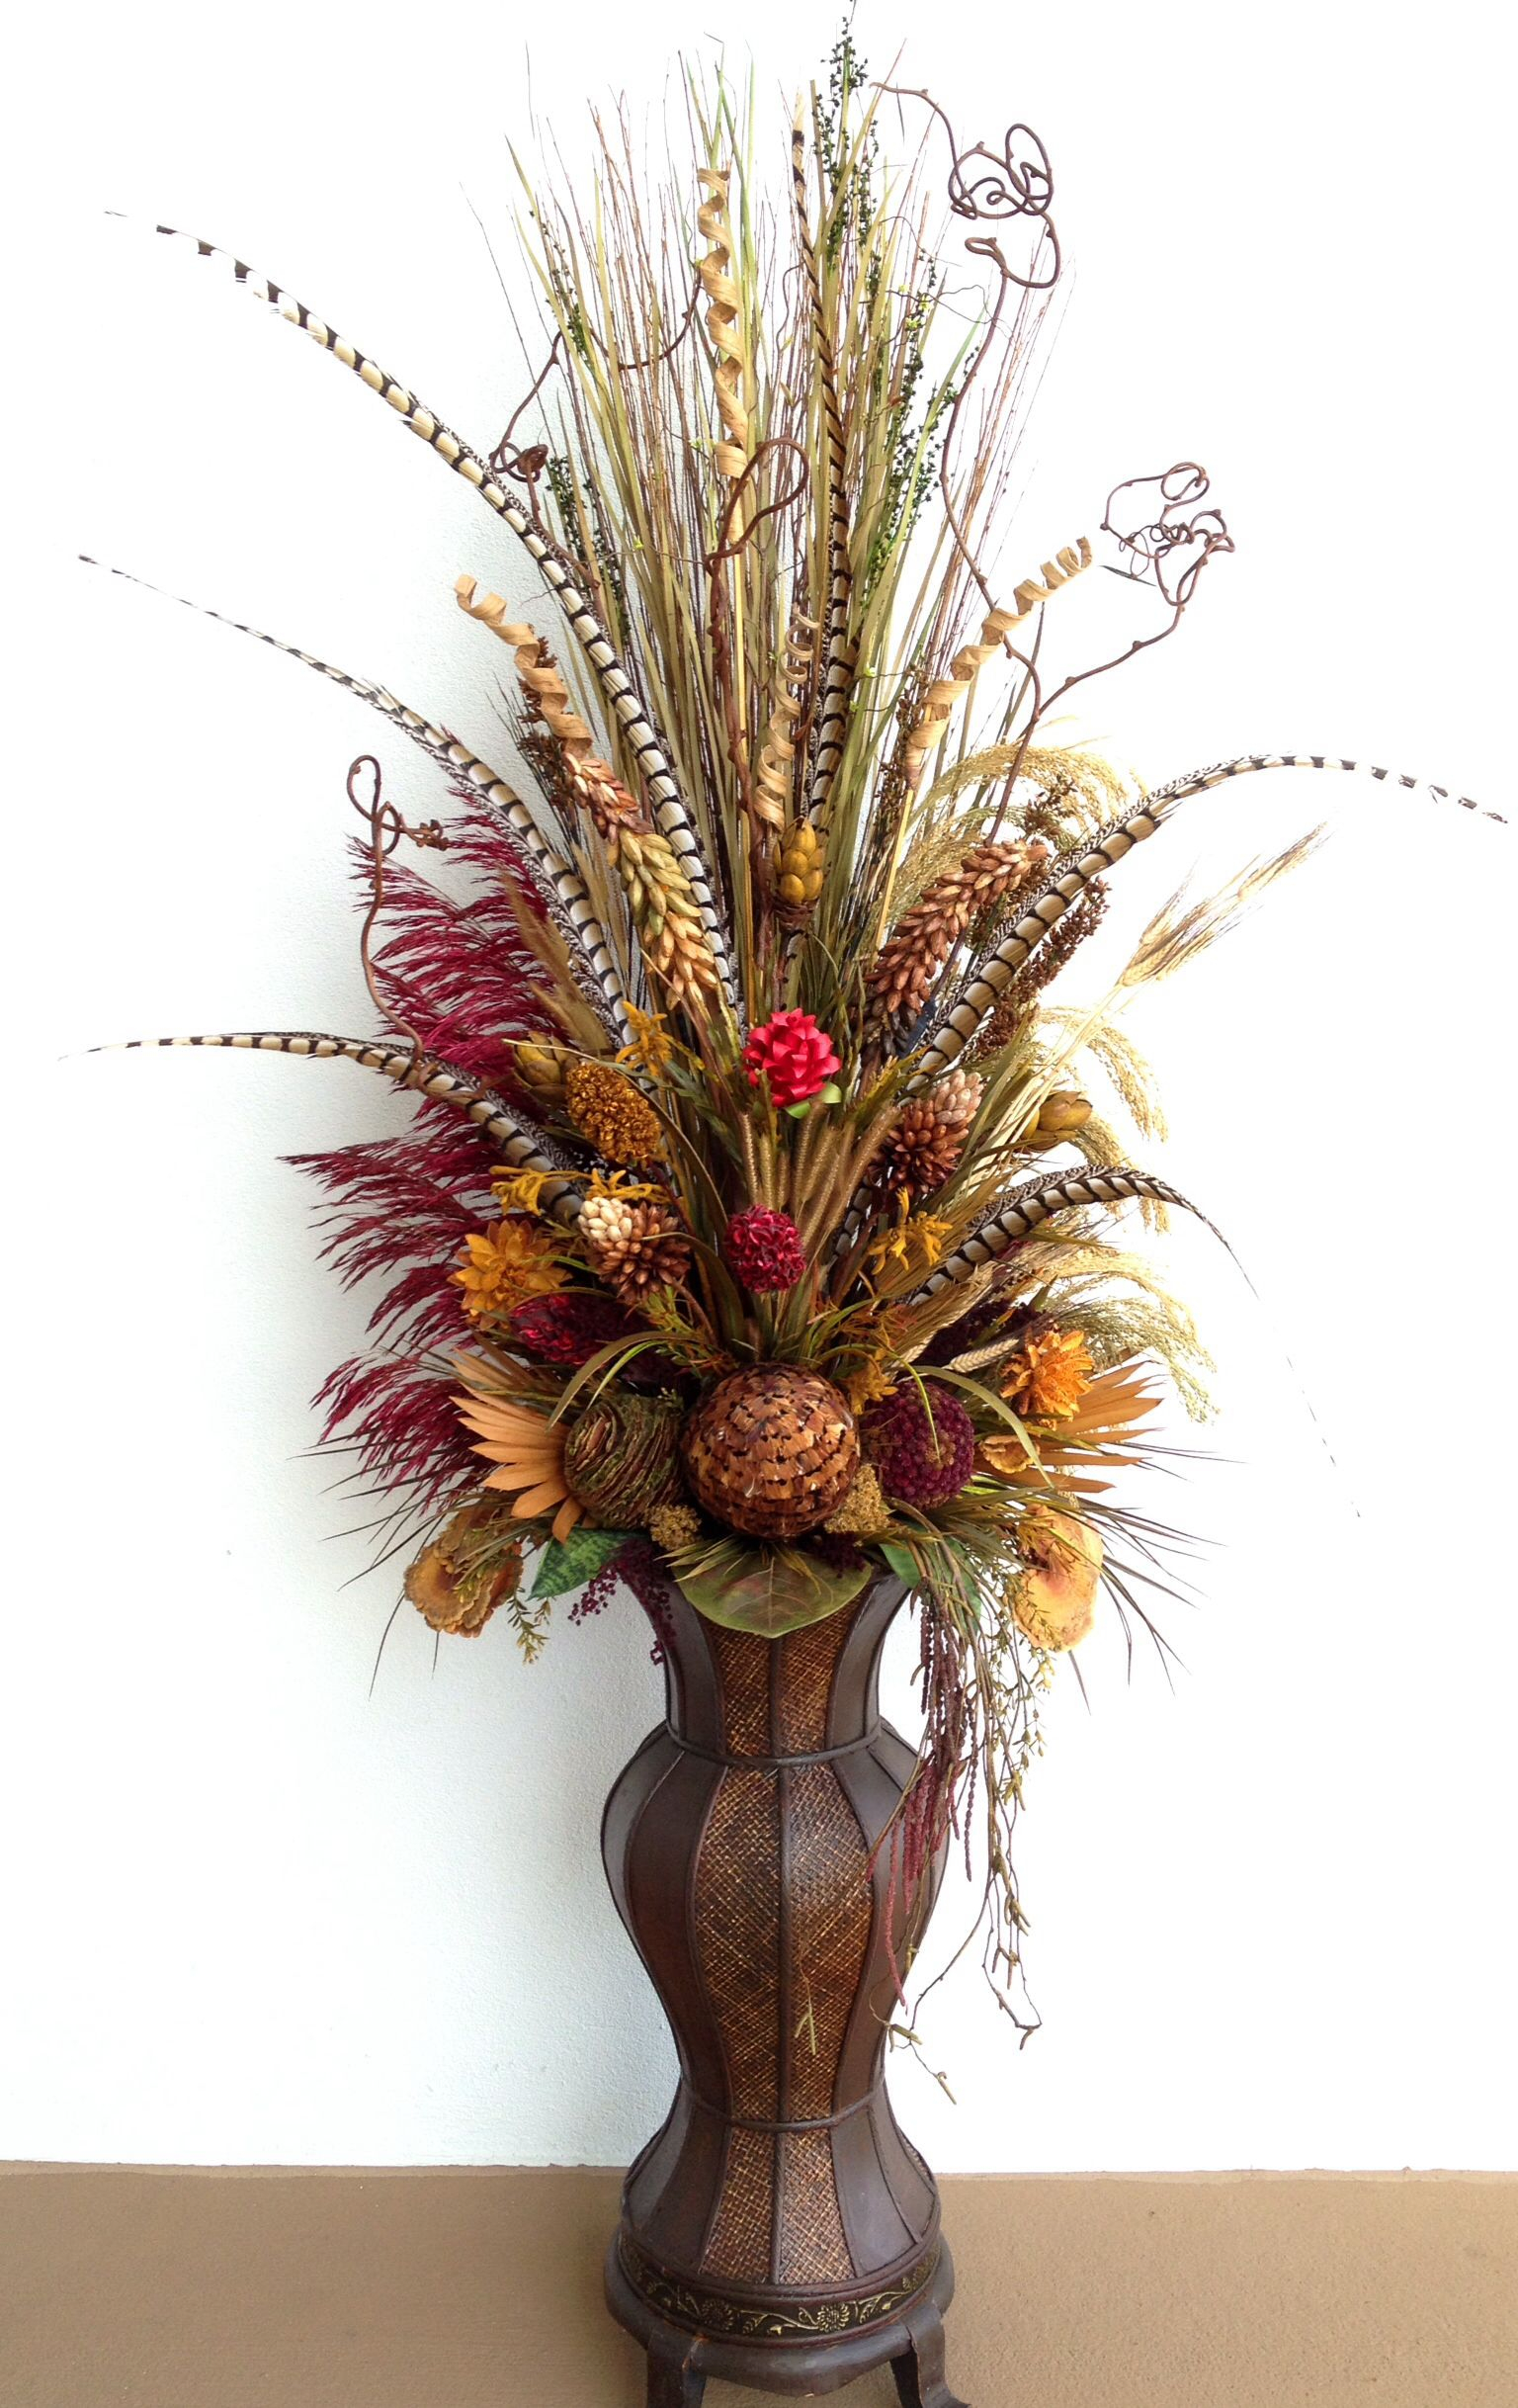 Six Feet Tall Dried Floral Arrangement With Pheasant within dimensions 1536 X 2436